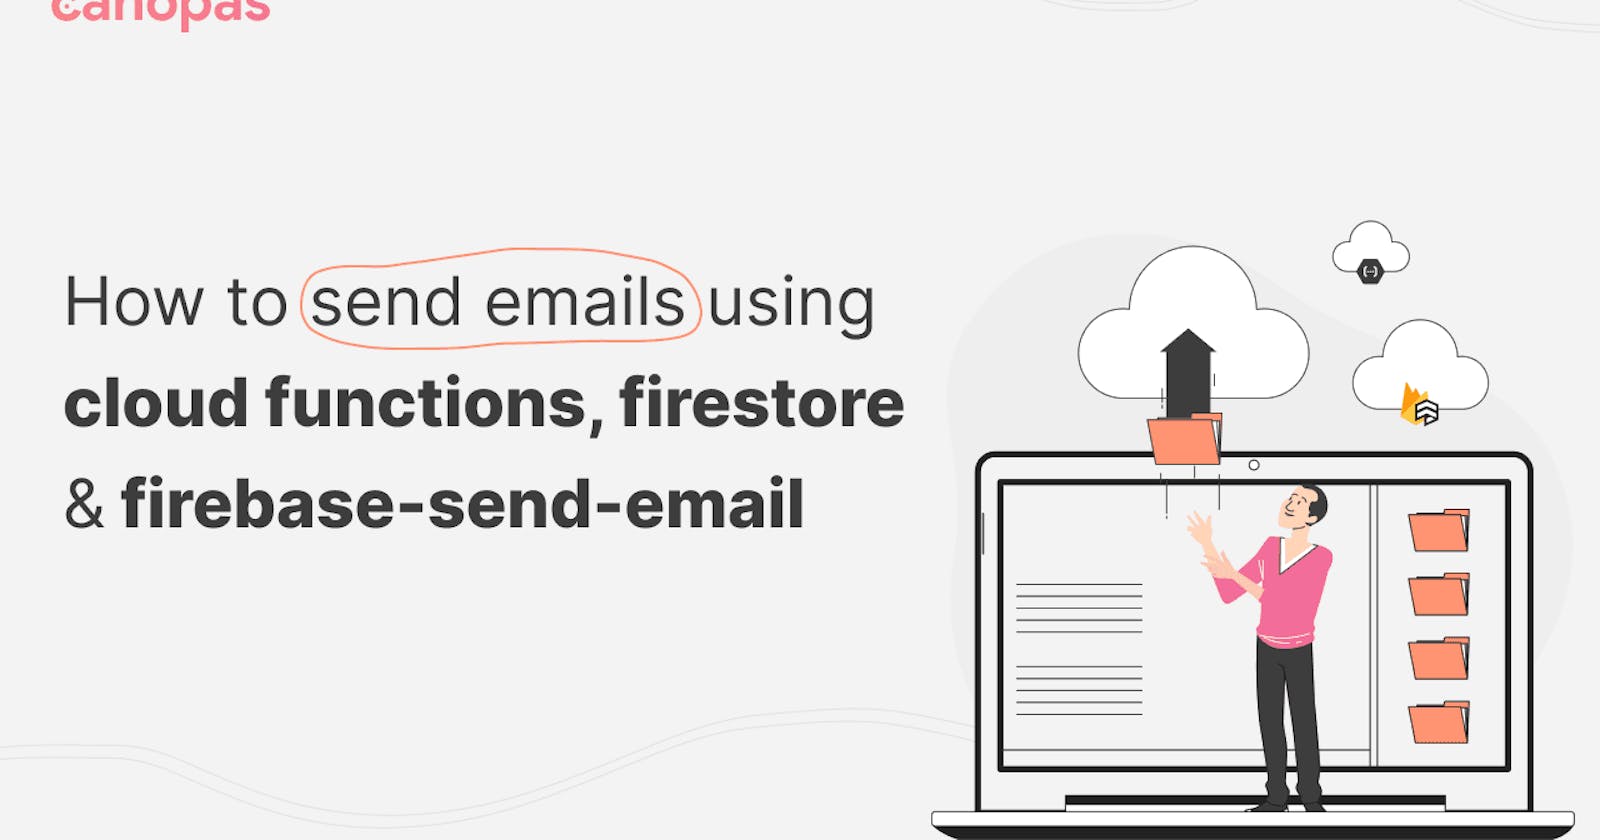 How To Send Emails Using Cloud Functions, Firestore & Firebase-Send-Email